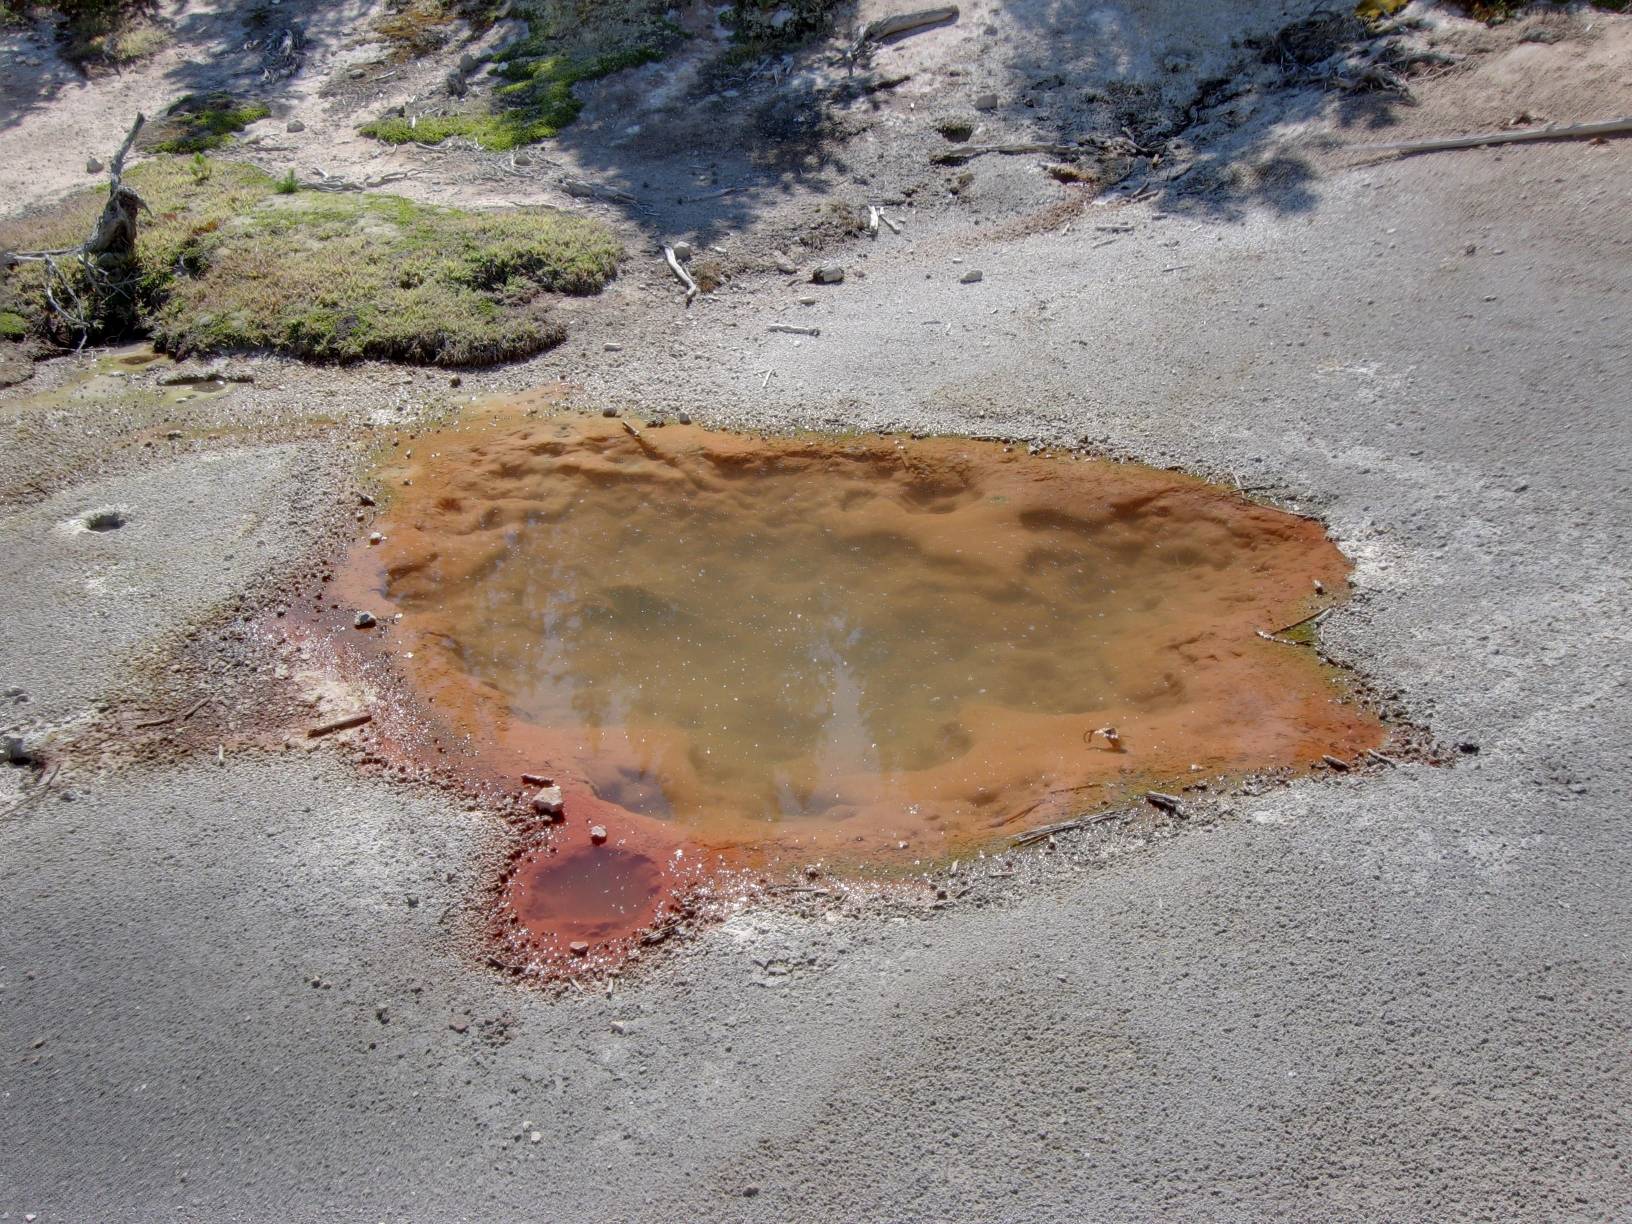 Image: A hot spring whose bottom is covered with a red algae